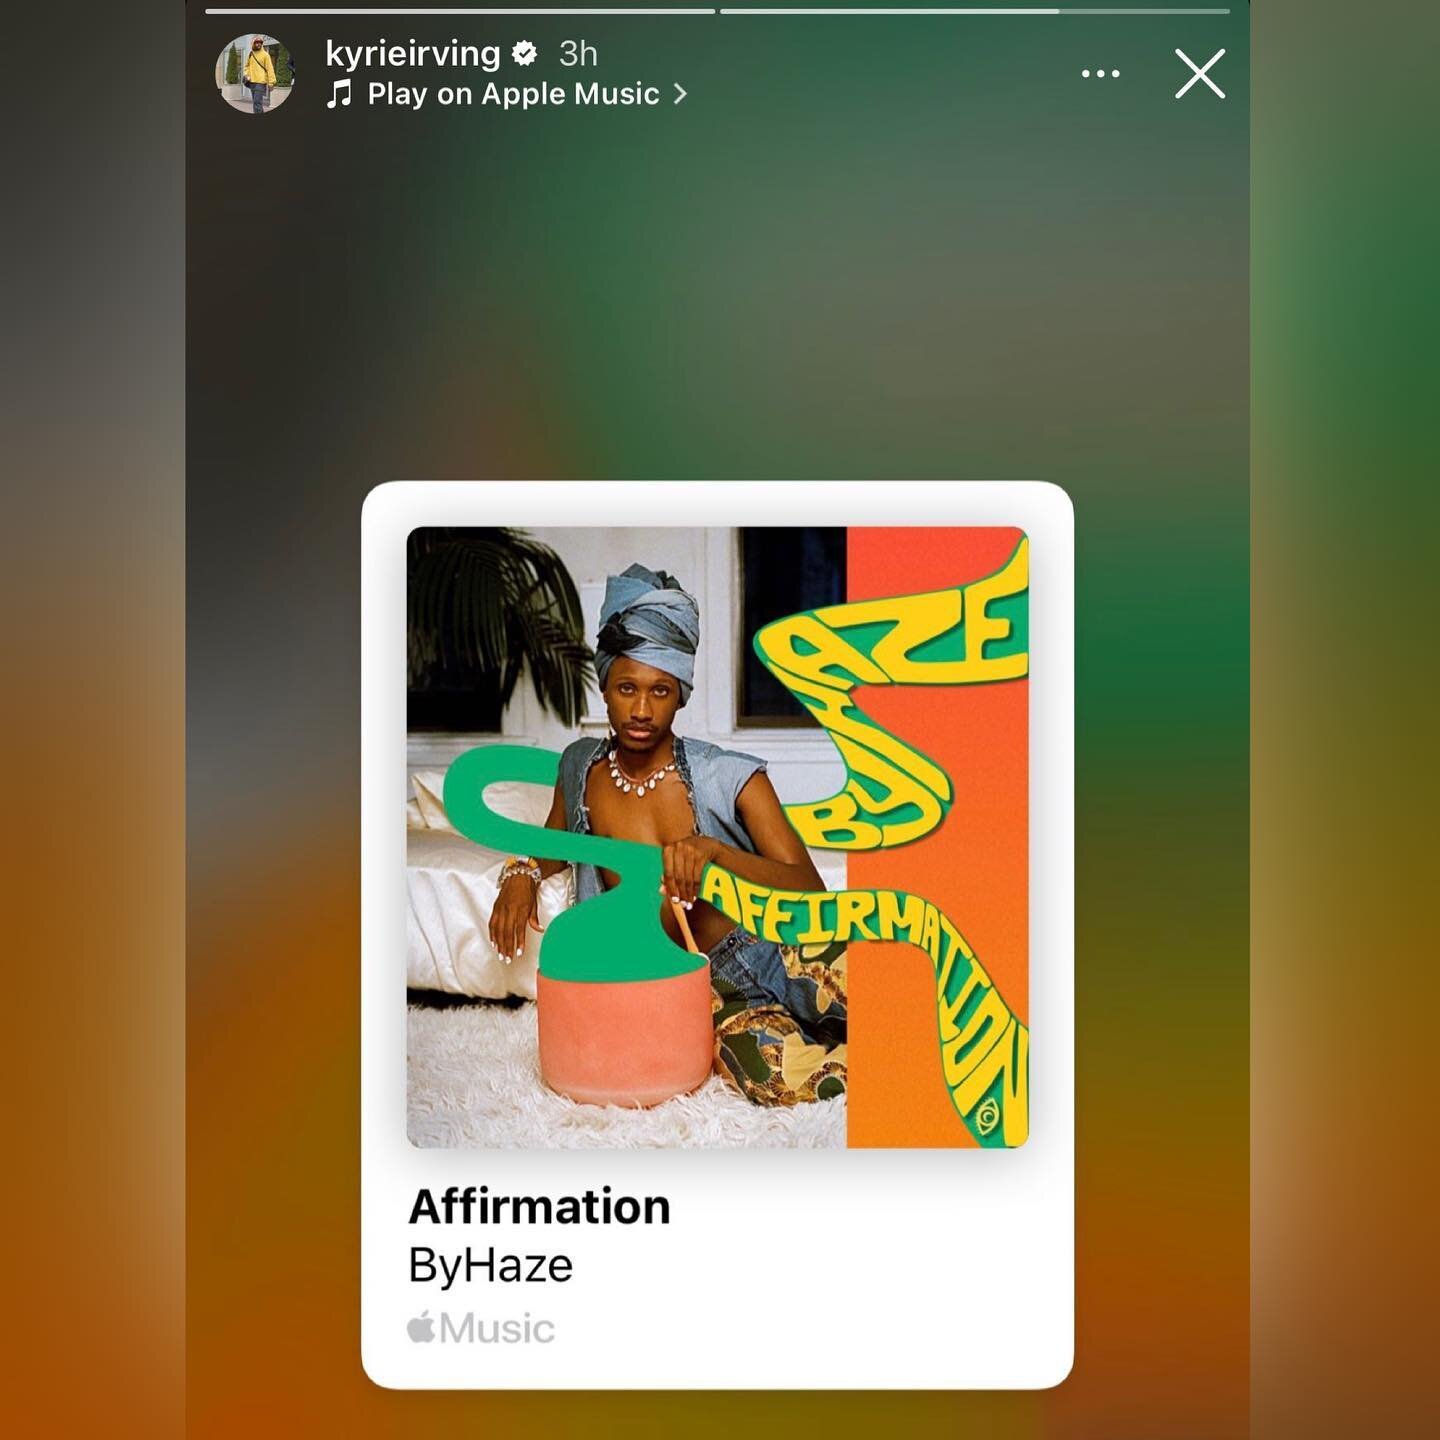 Y&rsquo;all @kyrieirving shared my song Affirmation on his story 🤯

Since releasing Affirmation in 2022 this song has truly changed my life for the better! God is so good! Thanks to y&rsquo;all&rsquo;s support I&rsquo;ve been able bring sound healin